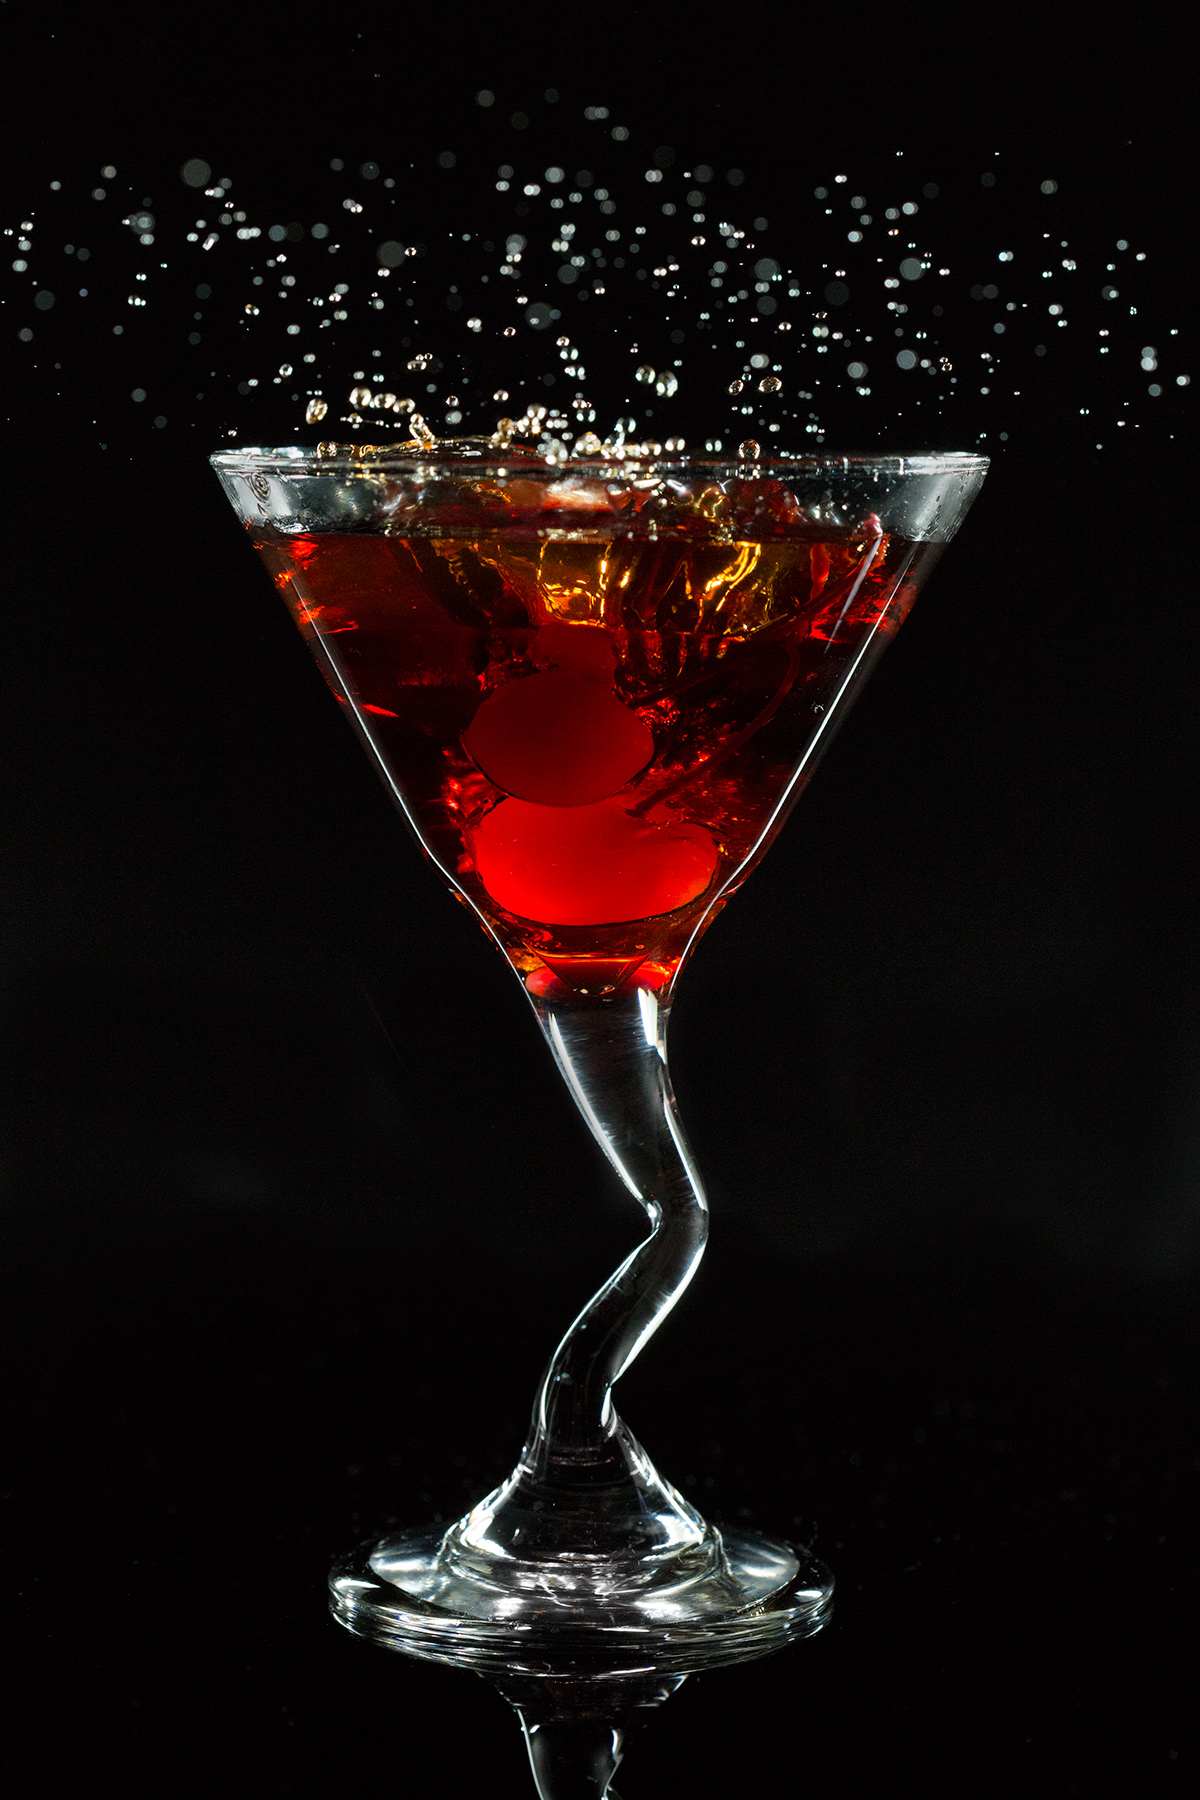 manhattan drink with cherries falling into it and spraying liquid above the glass